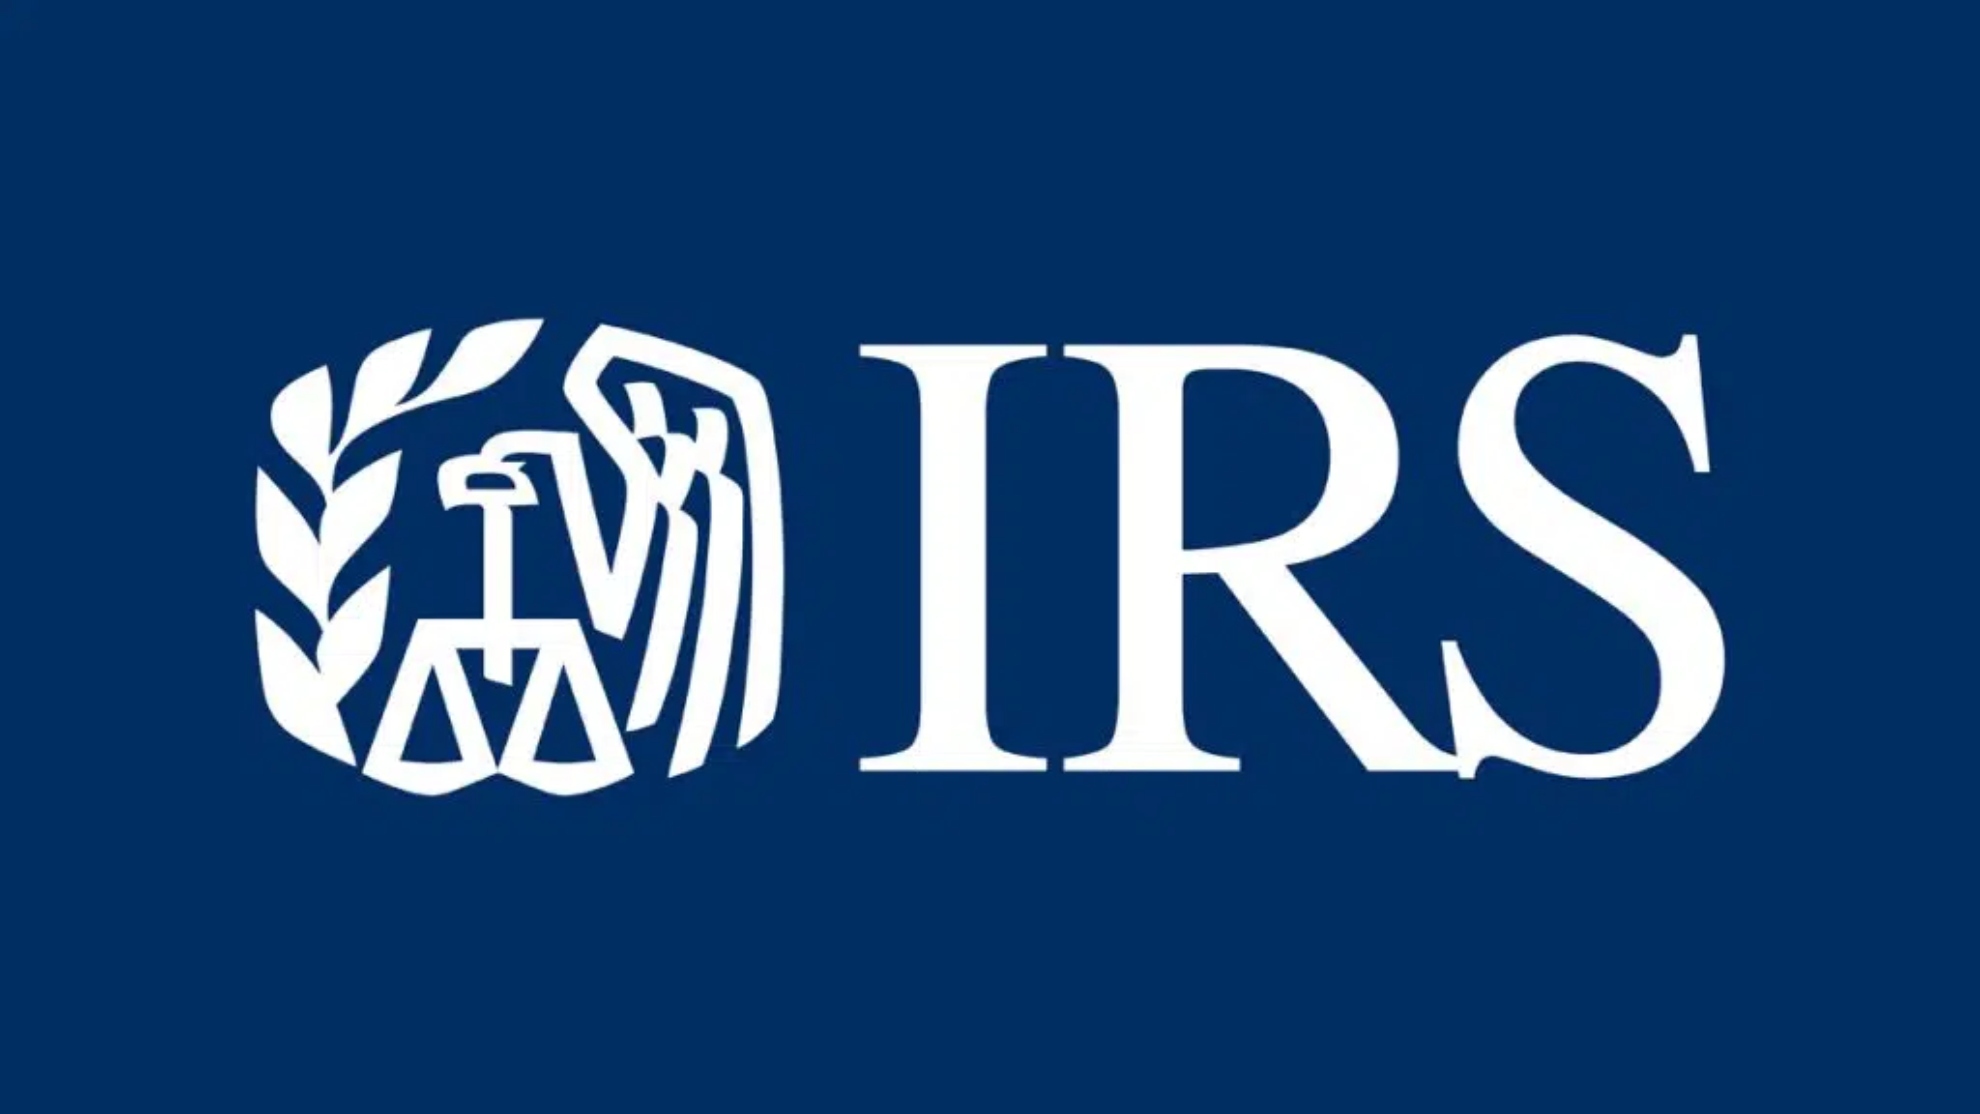 US: IRS offers tax relief for Maine taxpayers impacted by storms and floods